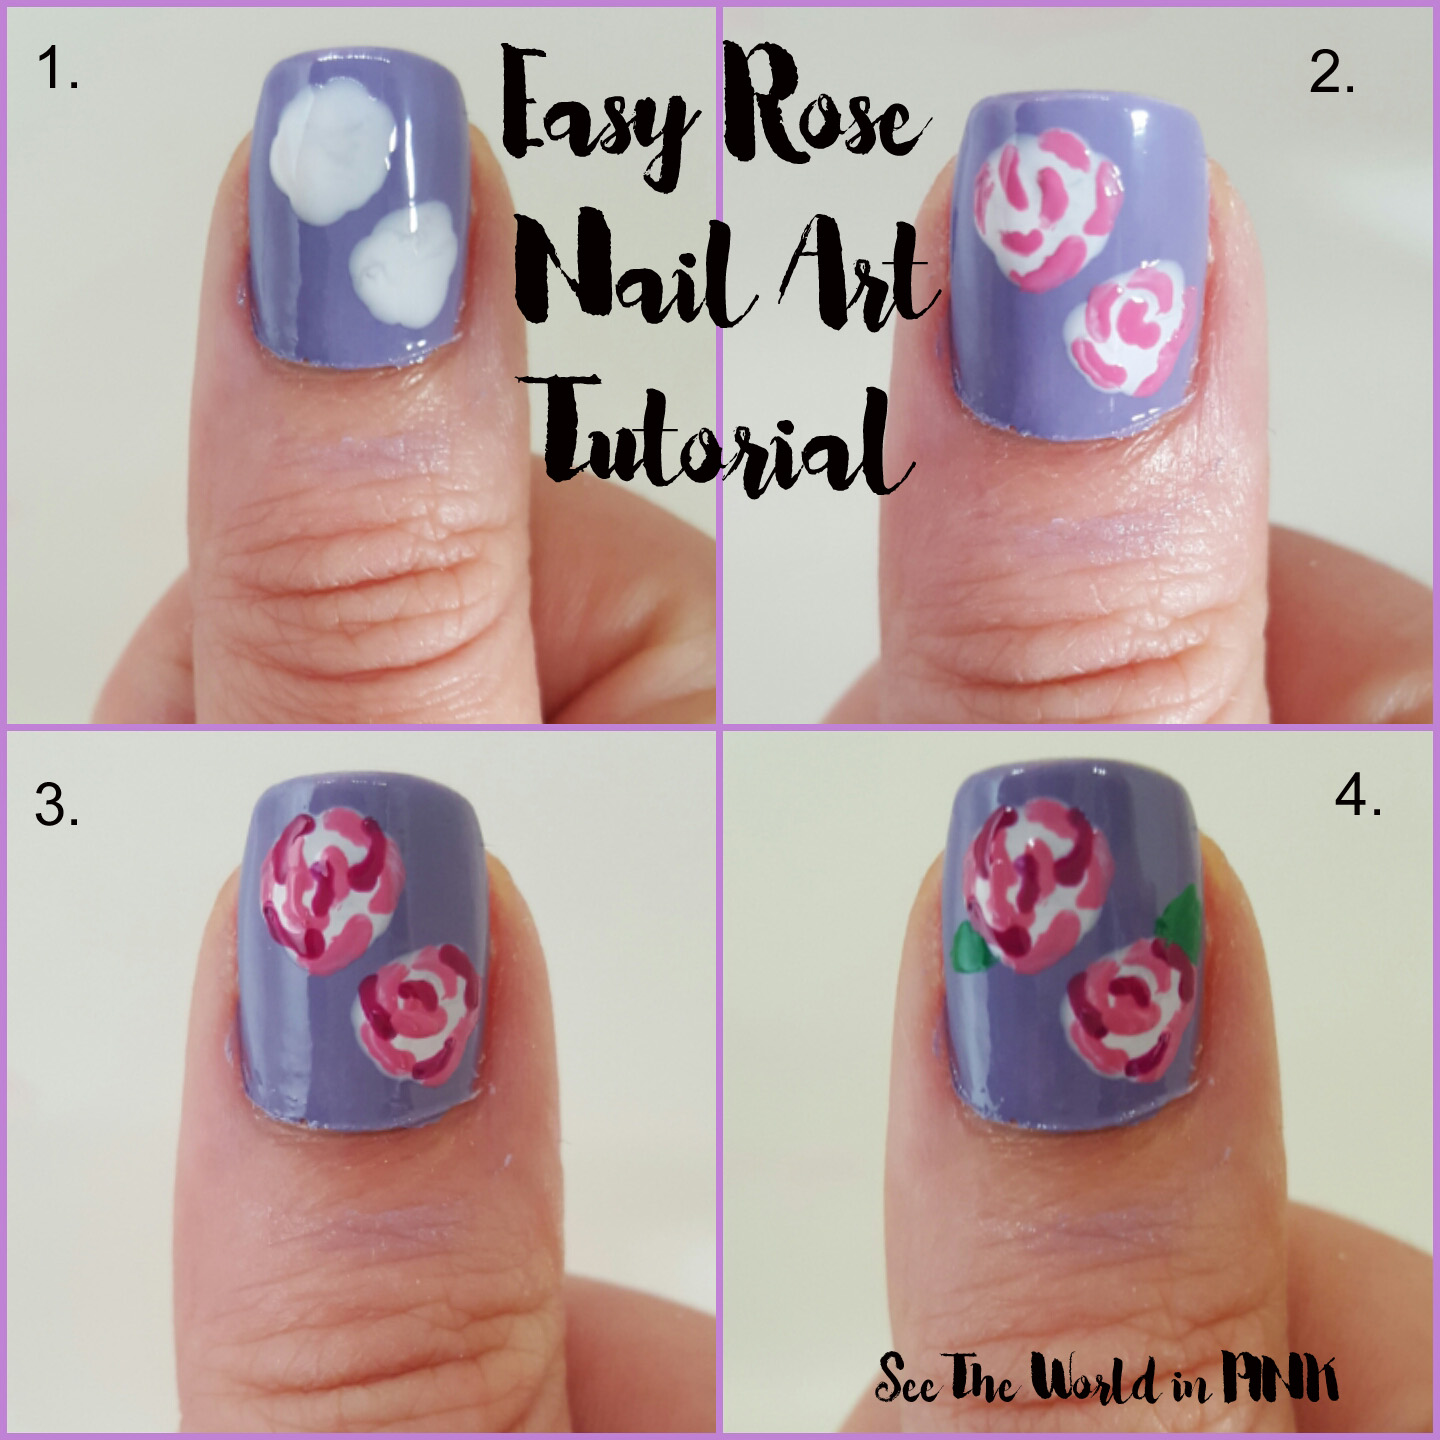 Rose Nails - Killeen, TX - Book Online - Prices, Reviews, Photos